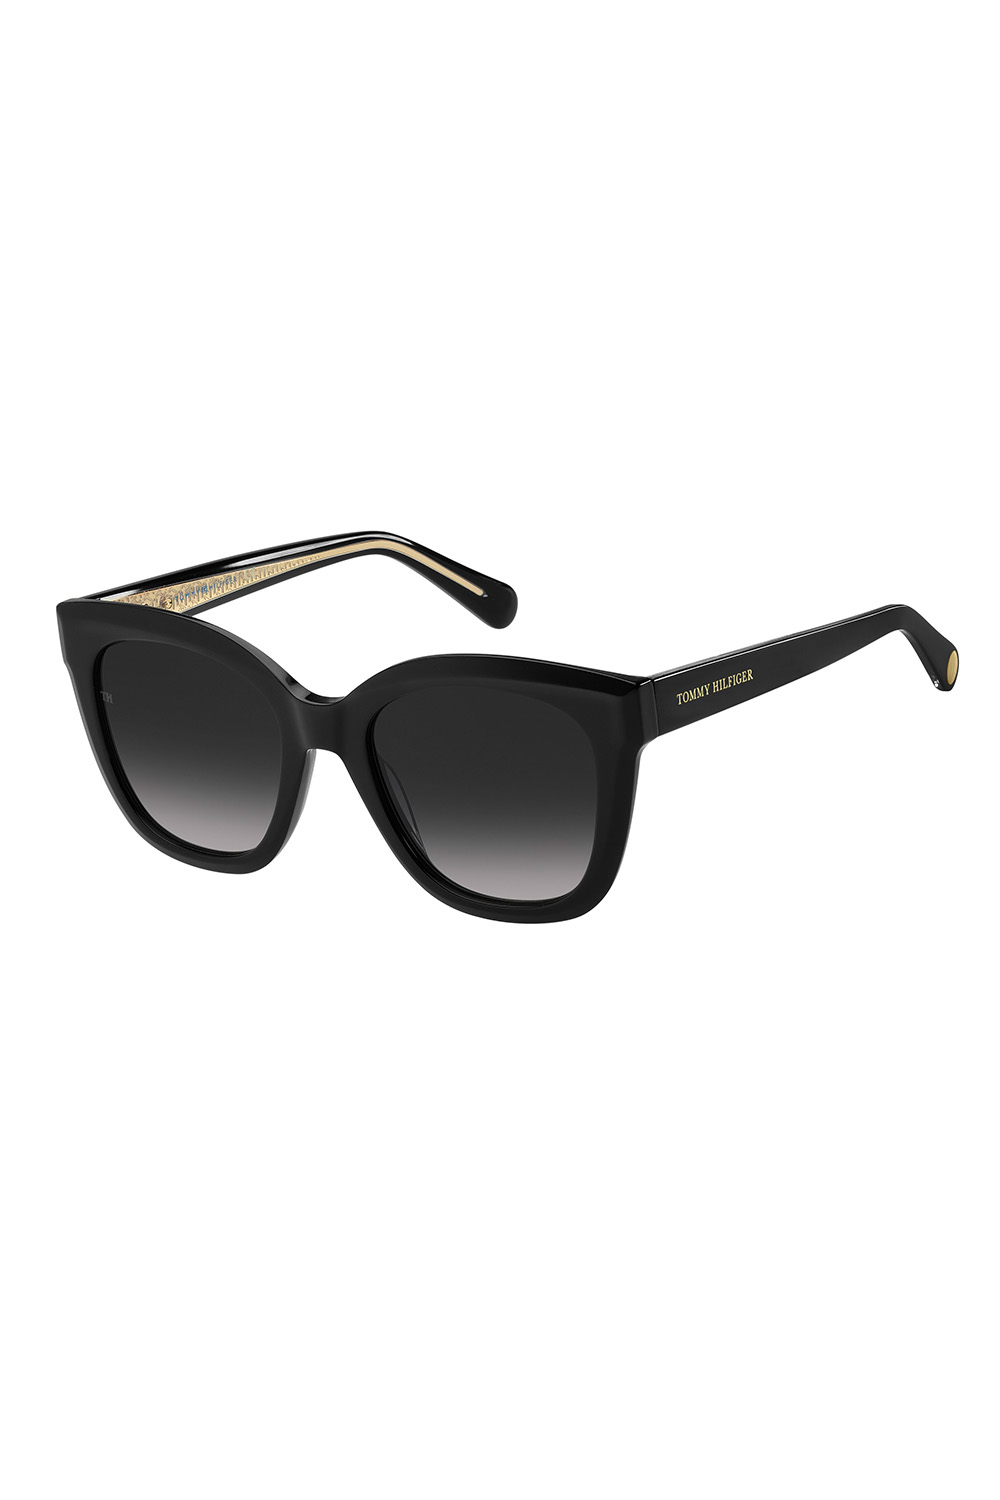 TOMMY HILFIGER Womens Full Rim Non-Polarized Cat Eye Sunglasses(Cat Eye), Shop Now at ShopperStop.com, India's No.1 Online Shopping Destination